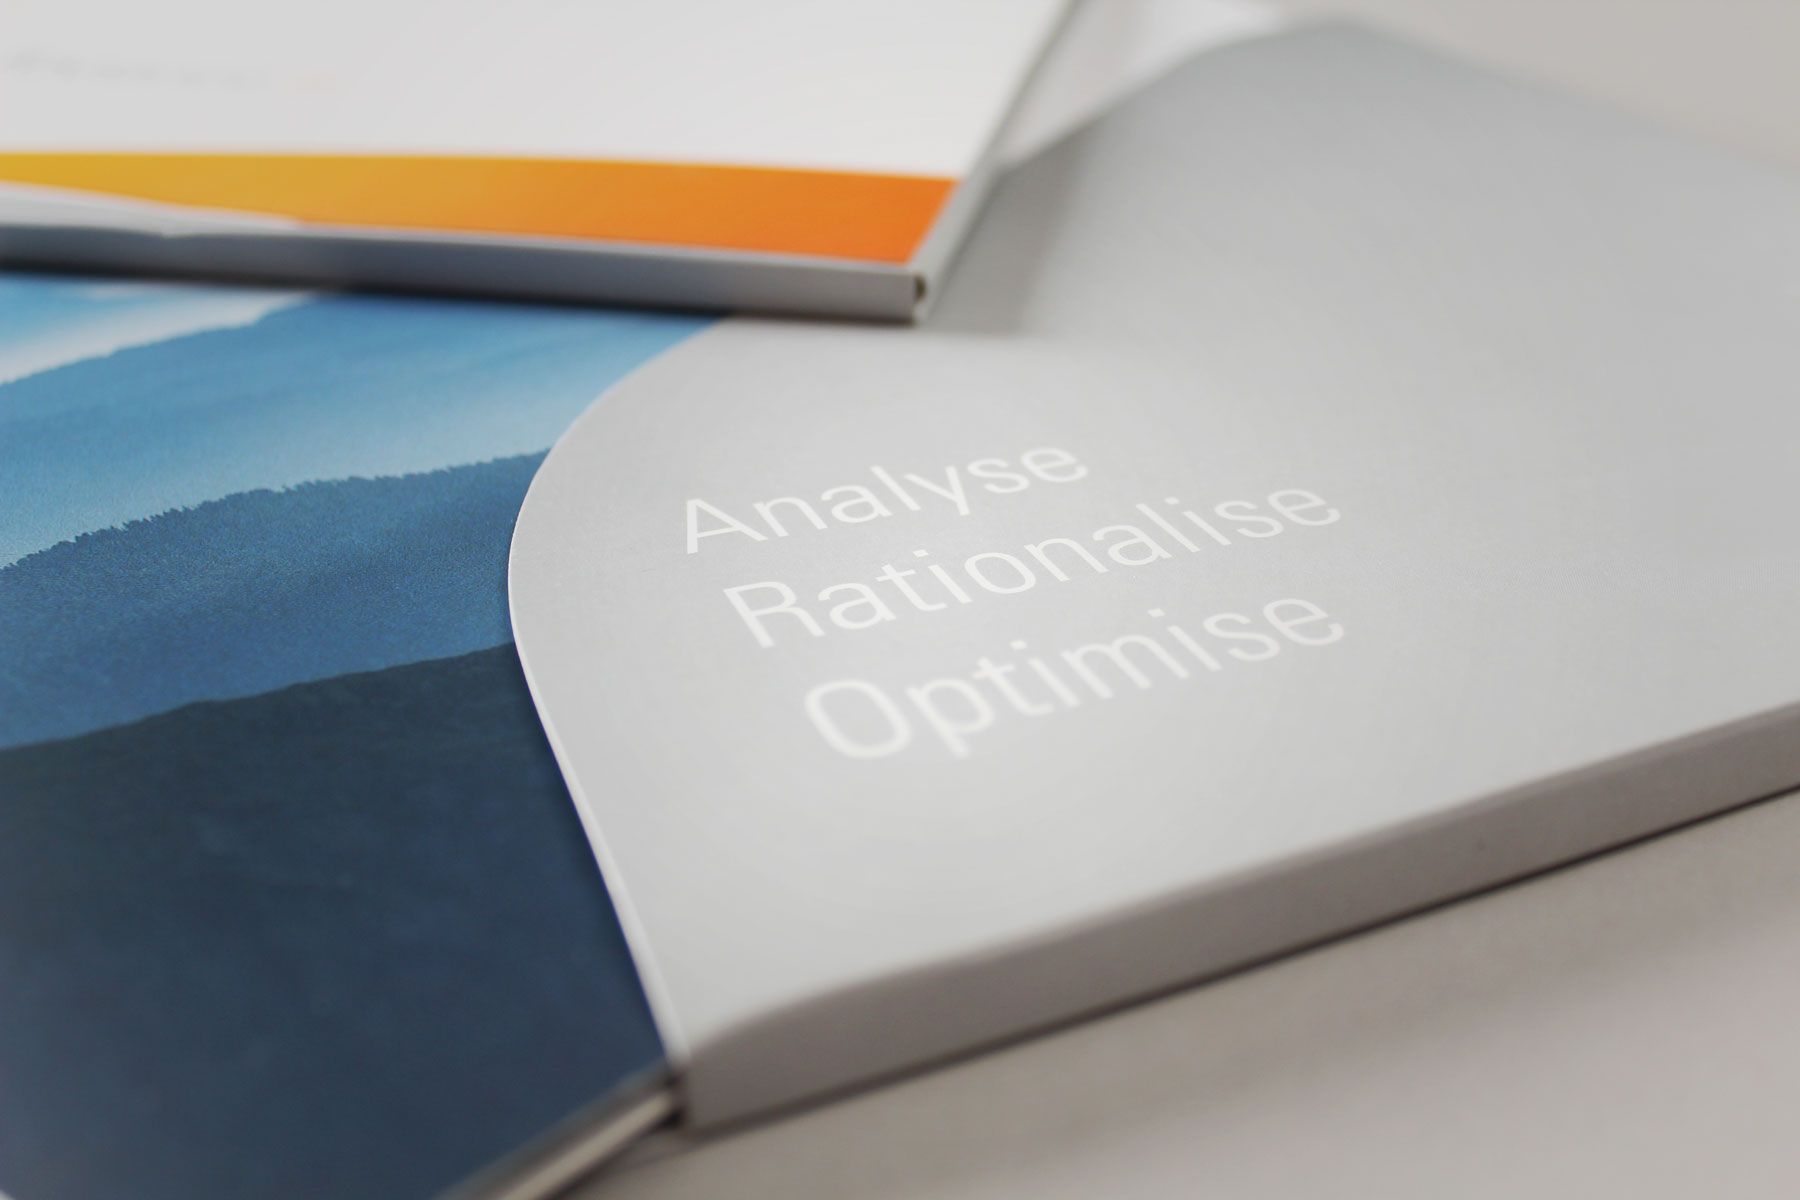 We helped develop the three part positioning statement. Analyse, Rationalise, Optimise - These indicate the three areas of business that make up the Foviance offer.